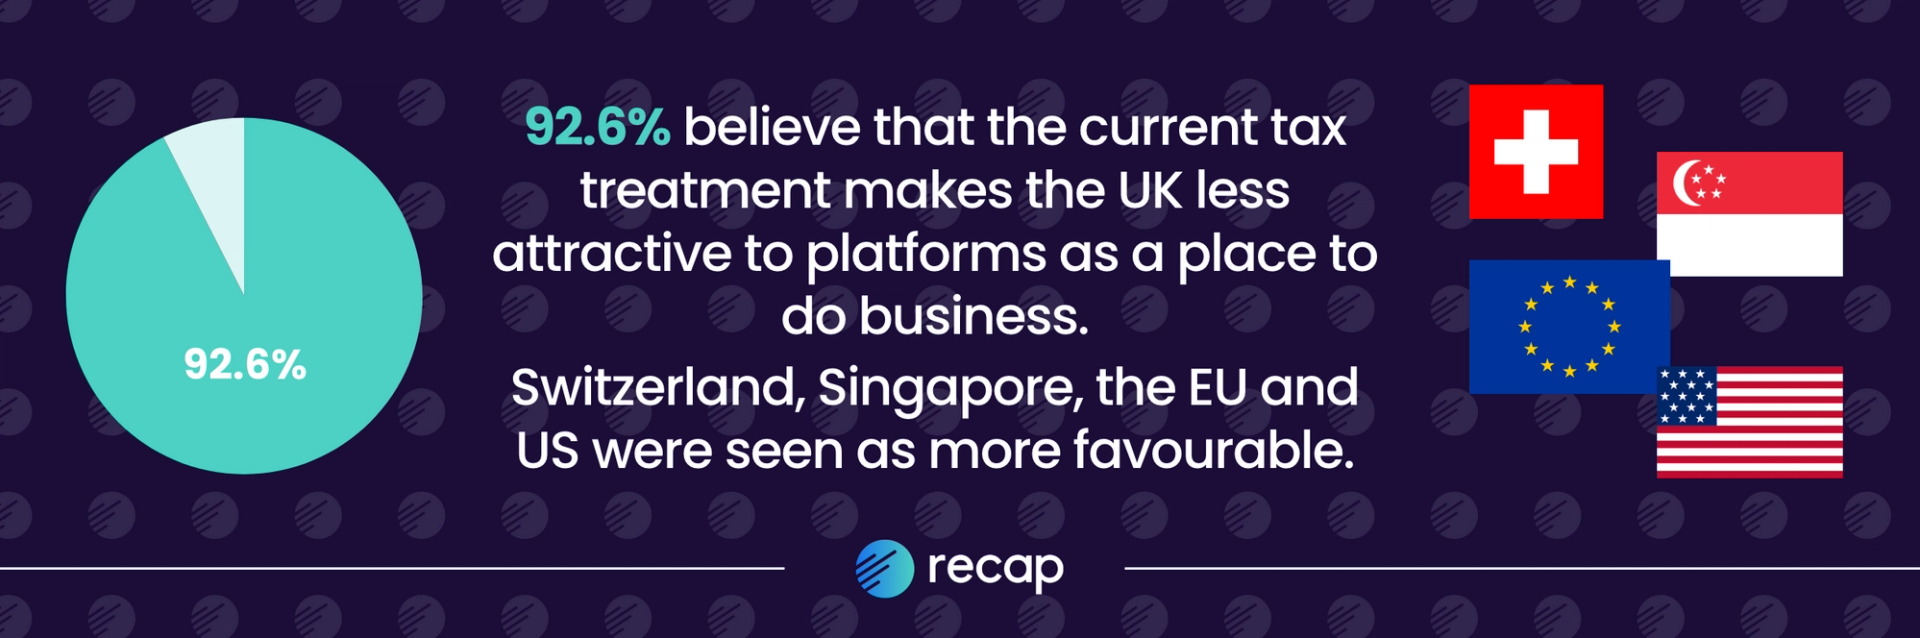 Infographic: 92.6% believe that the current tax treatment makes the UK less attractive to platforms as a place to do business. Switzerland, Singapore, the EU and US were seen as more favourable. 